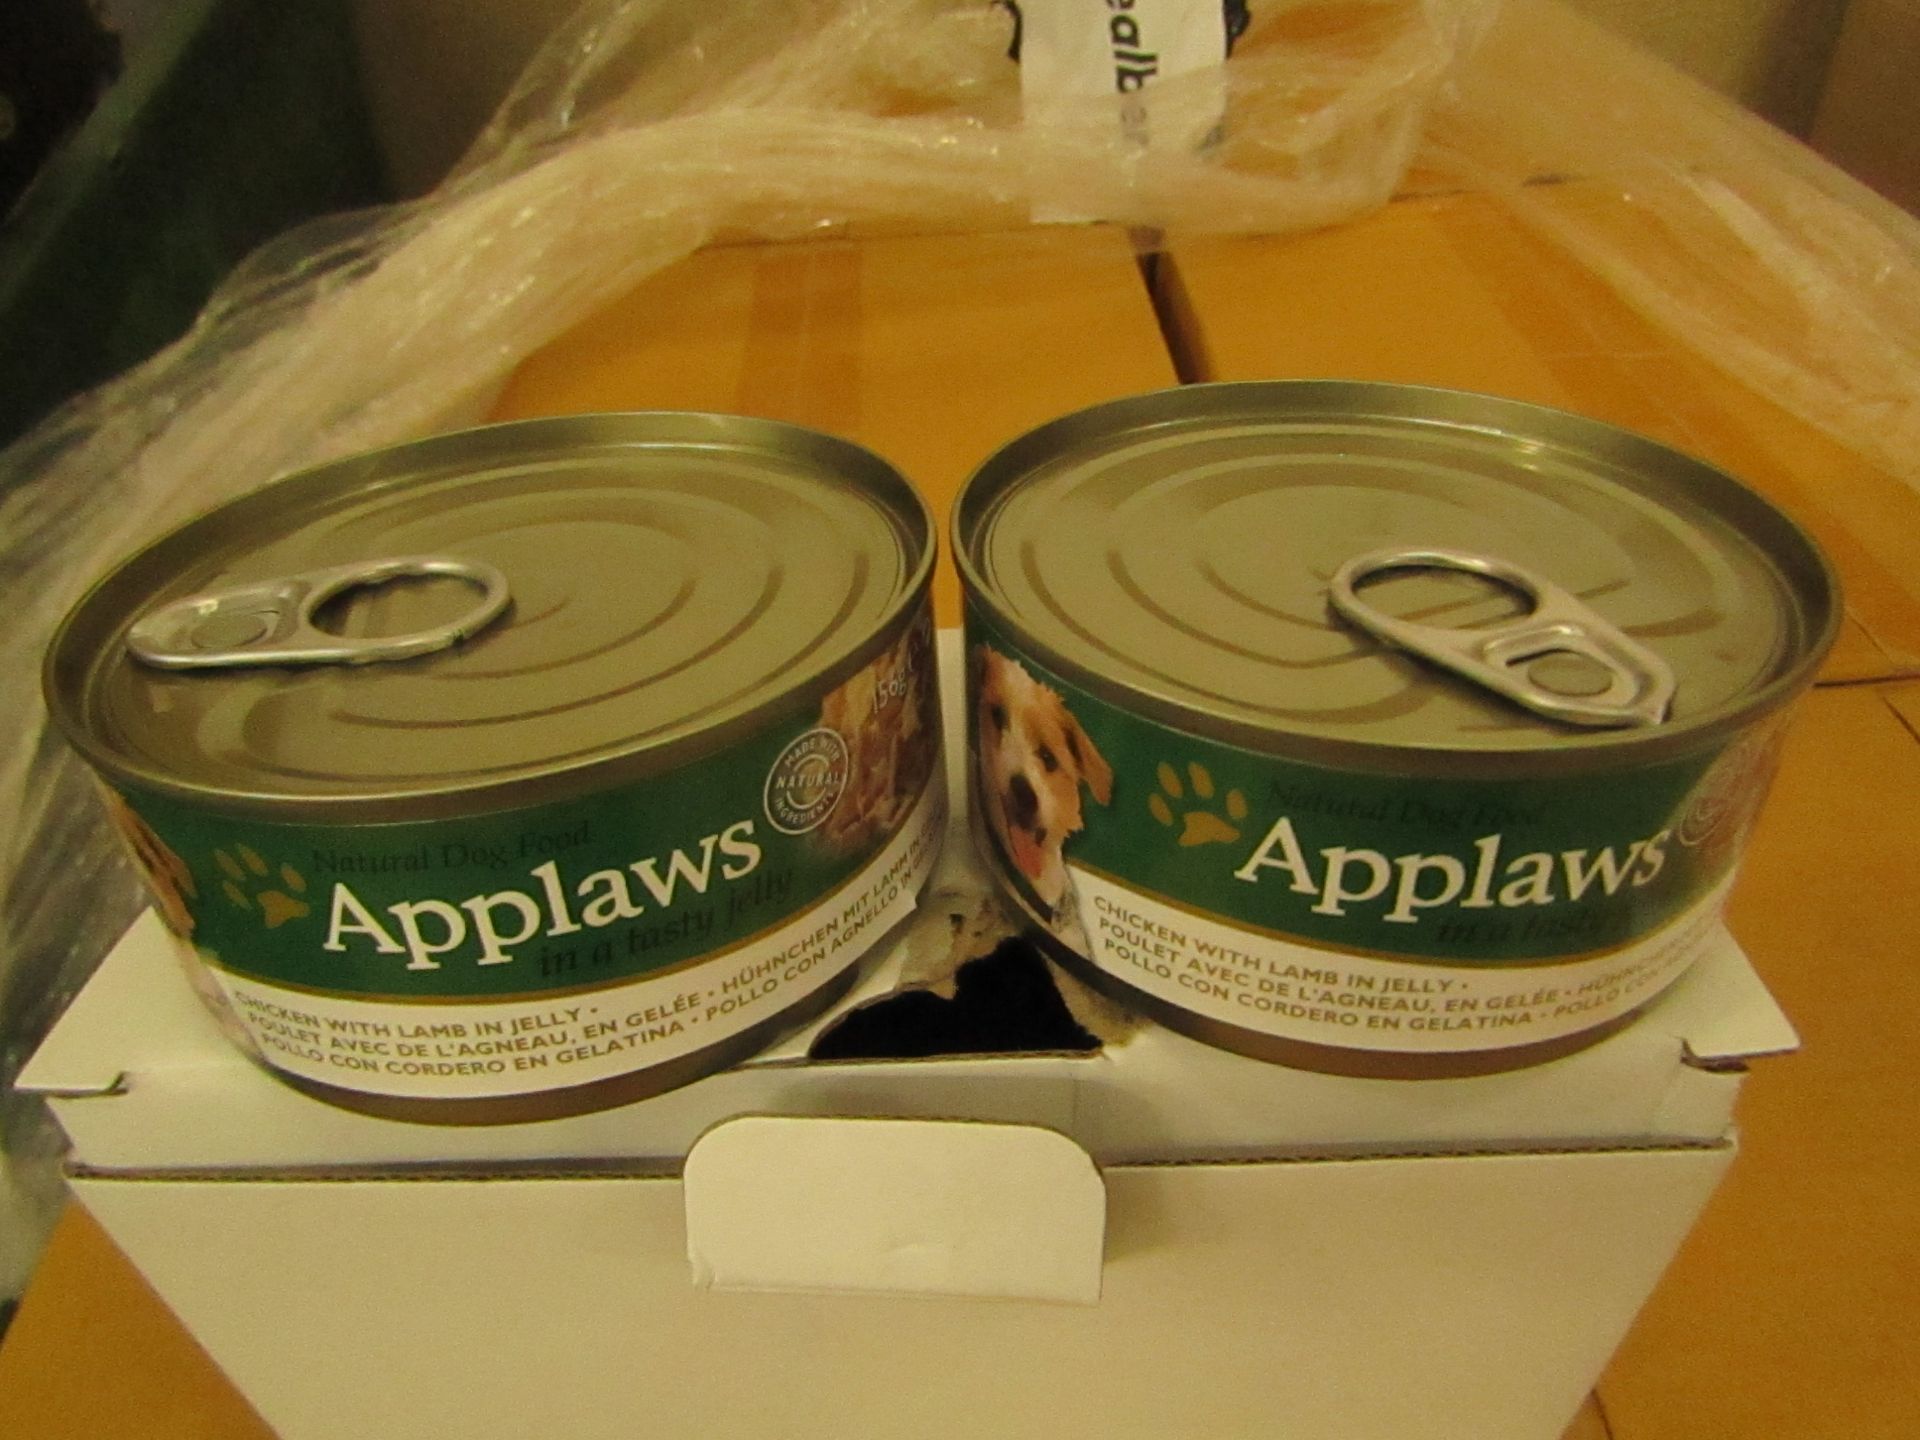 72x Applaws - Dog Tin Chicken, Lamb & Jelly - BB 24/08/20 - Unused & Boxed.